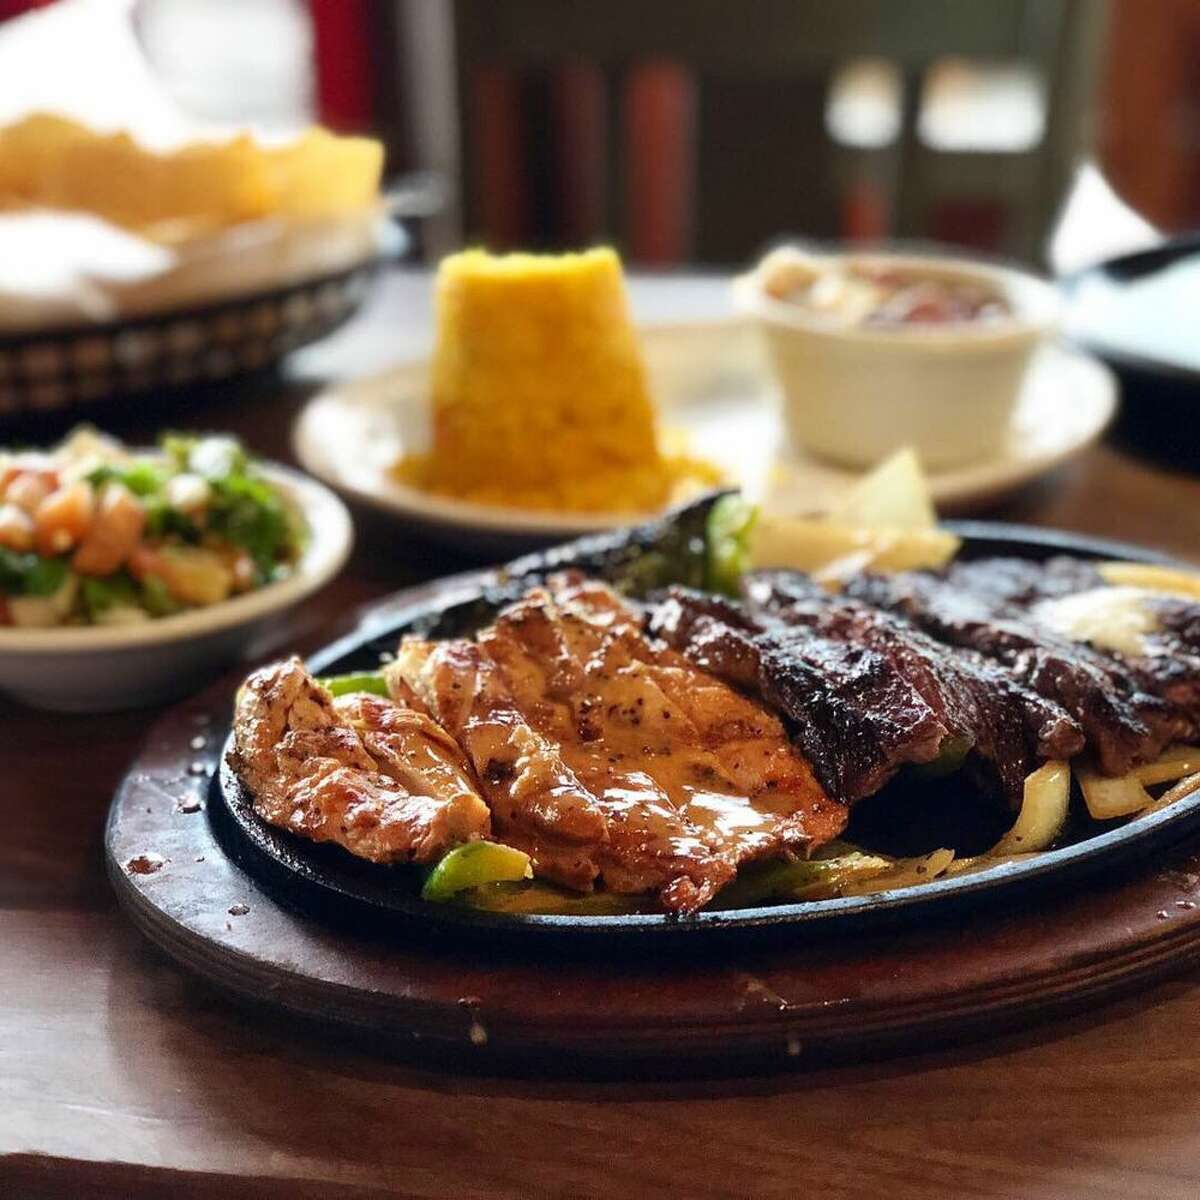 Chicken and beef combination fajitas from The Original Ninfa's on Navigation.